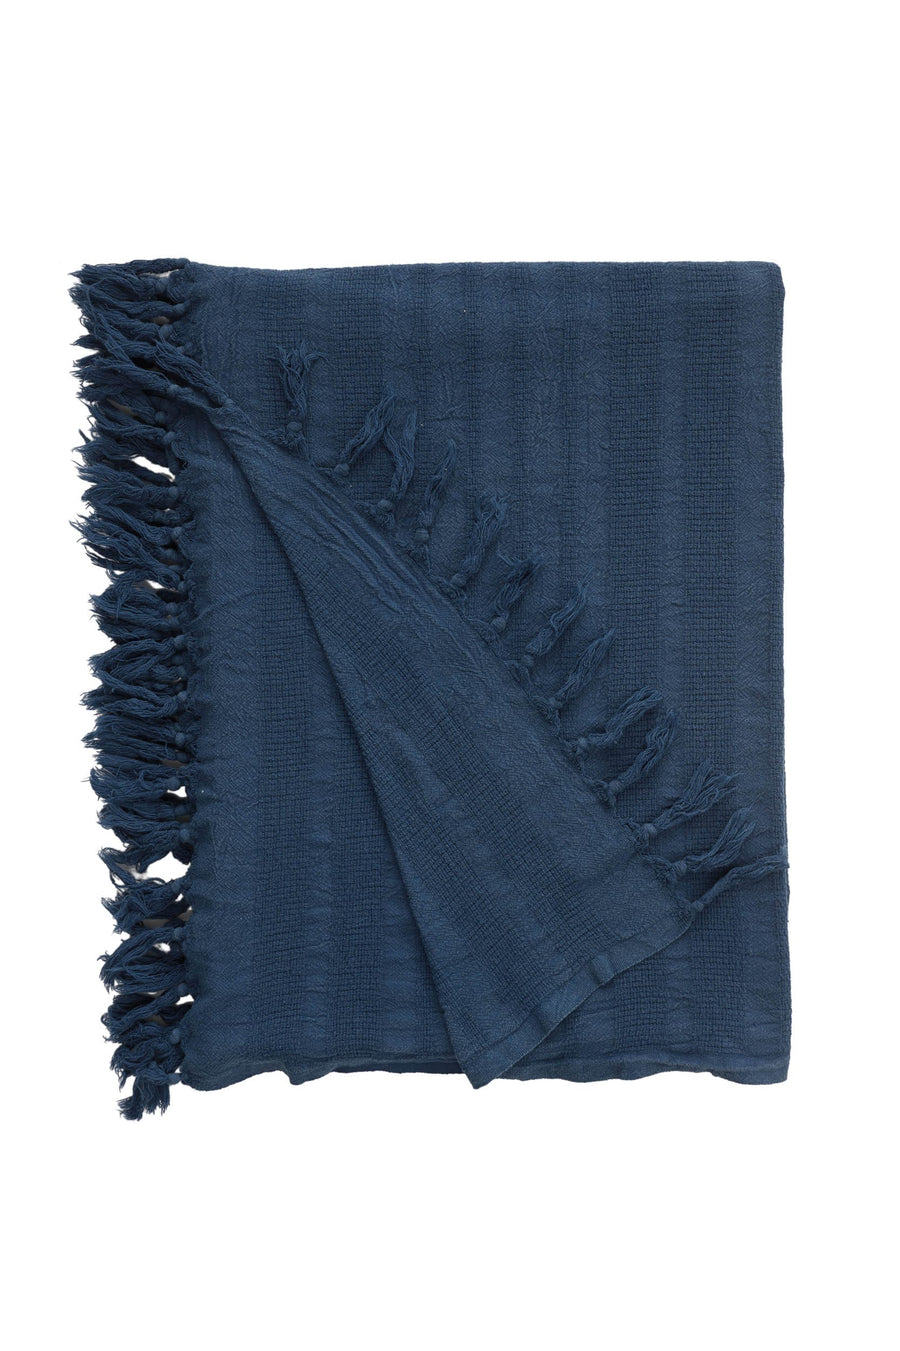 Rhye Dyed Cotton Bed Blanket - Navy